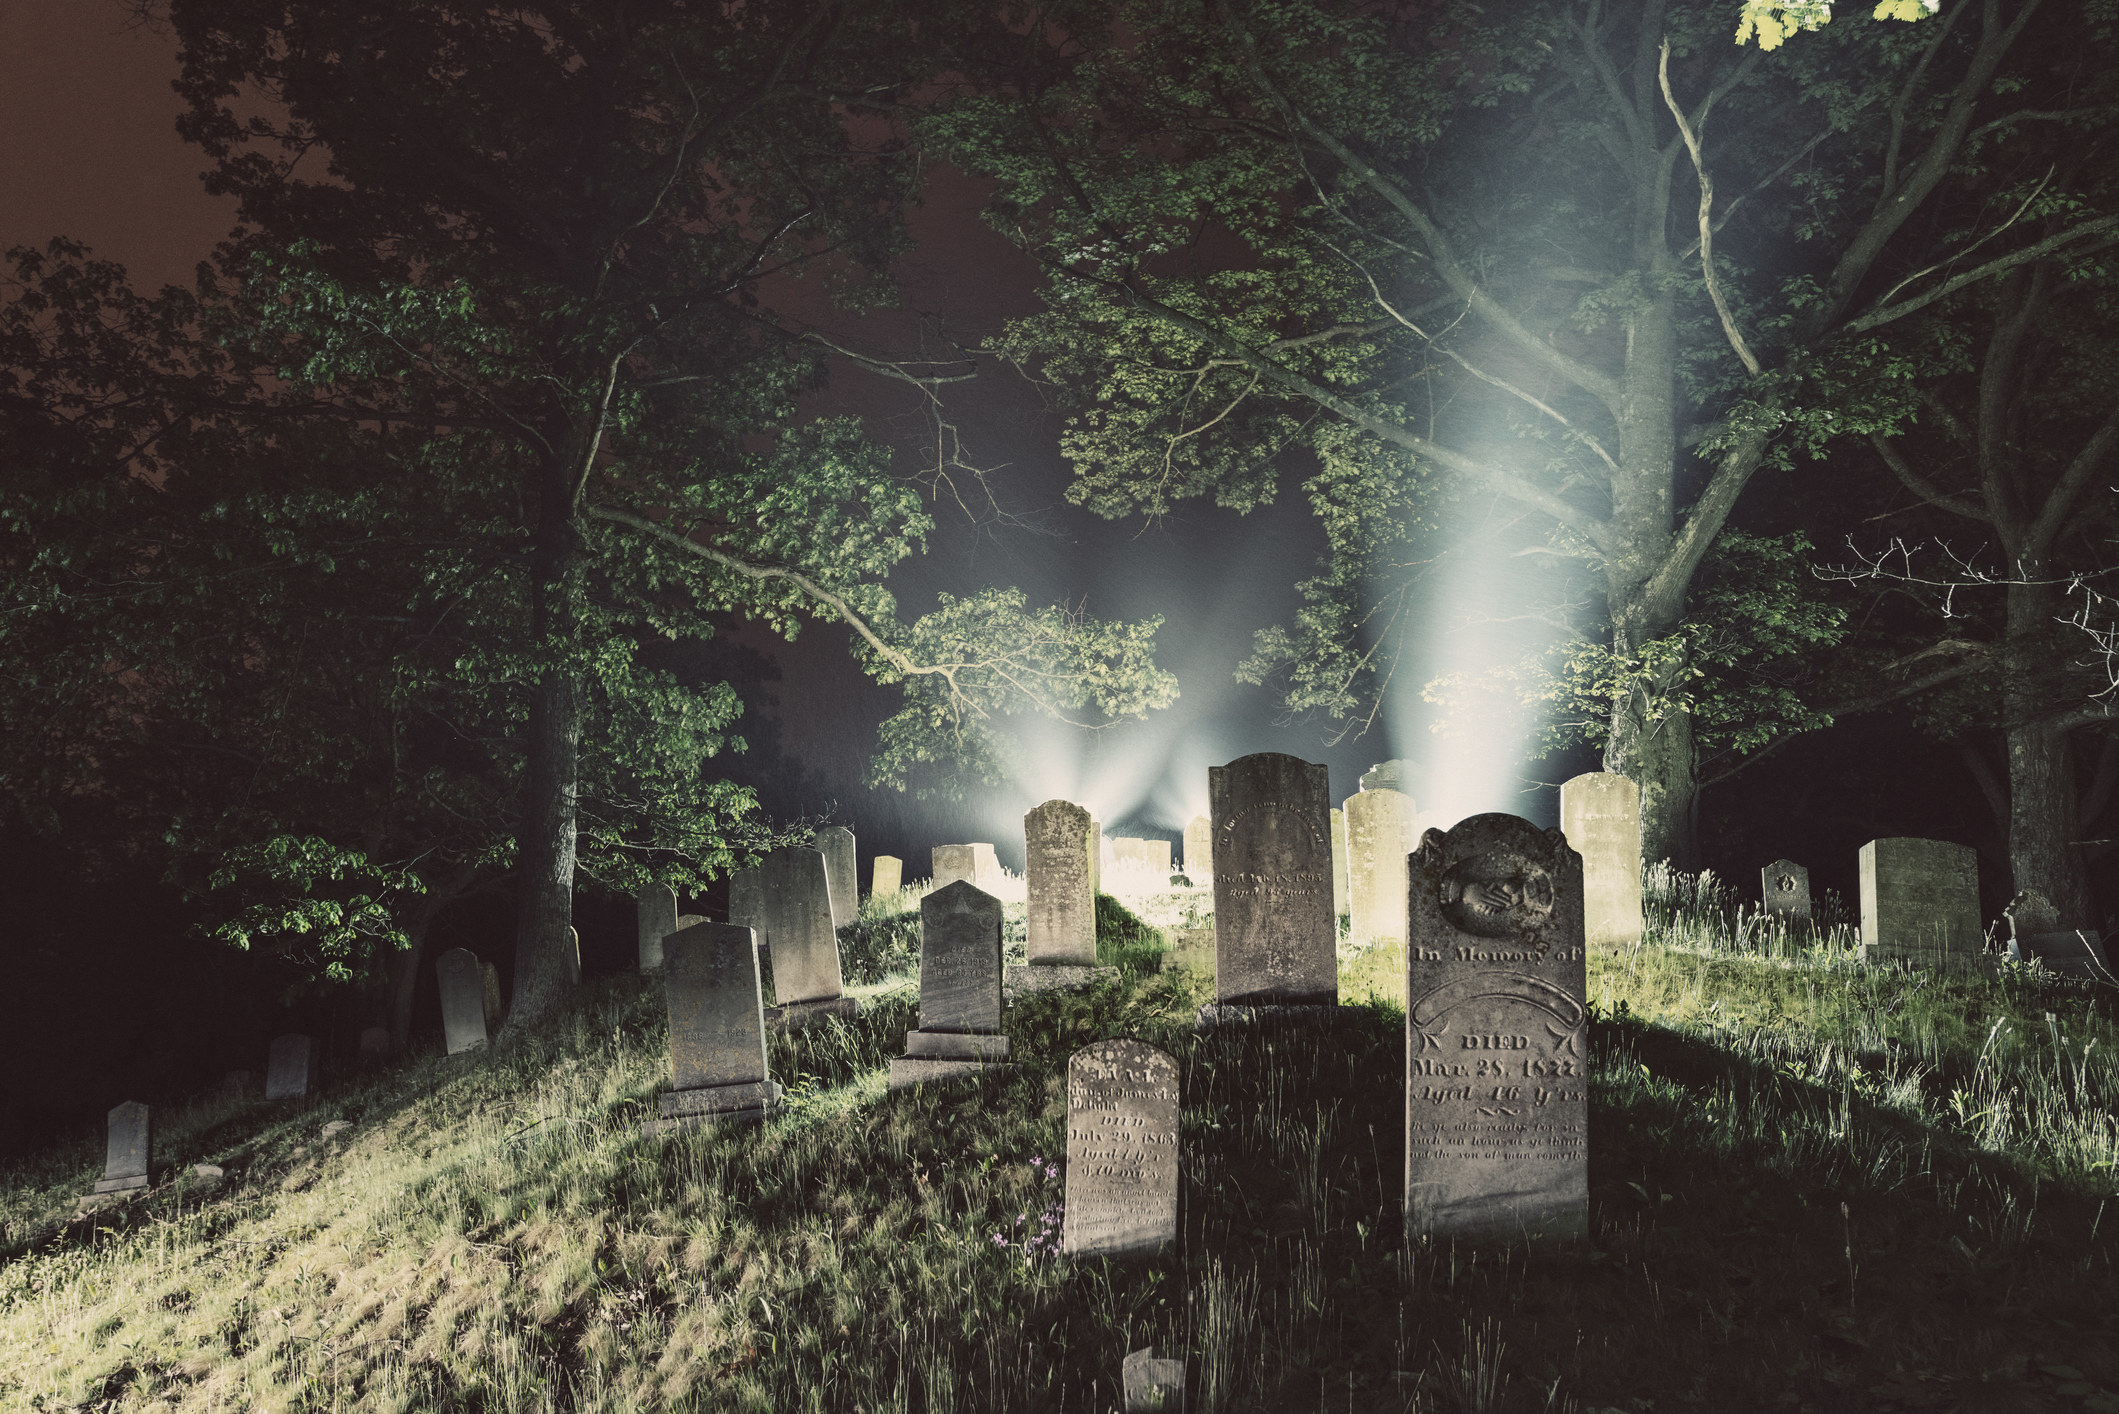 headstones on a hill at night with flashlights shining on them in the background